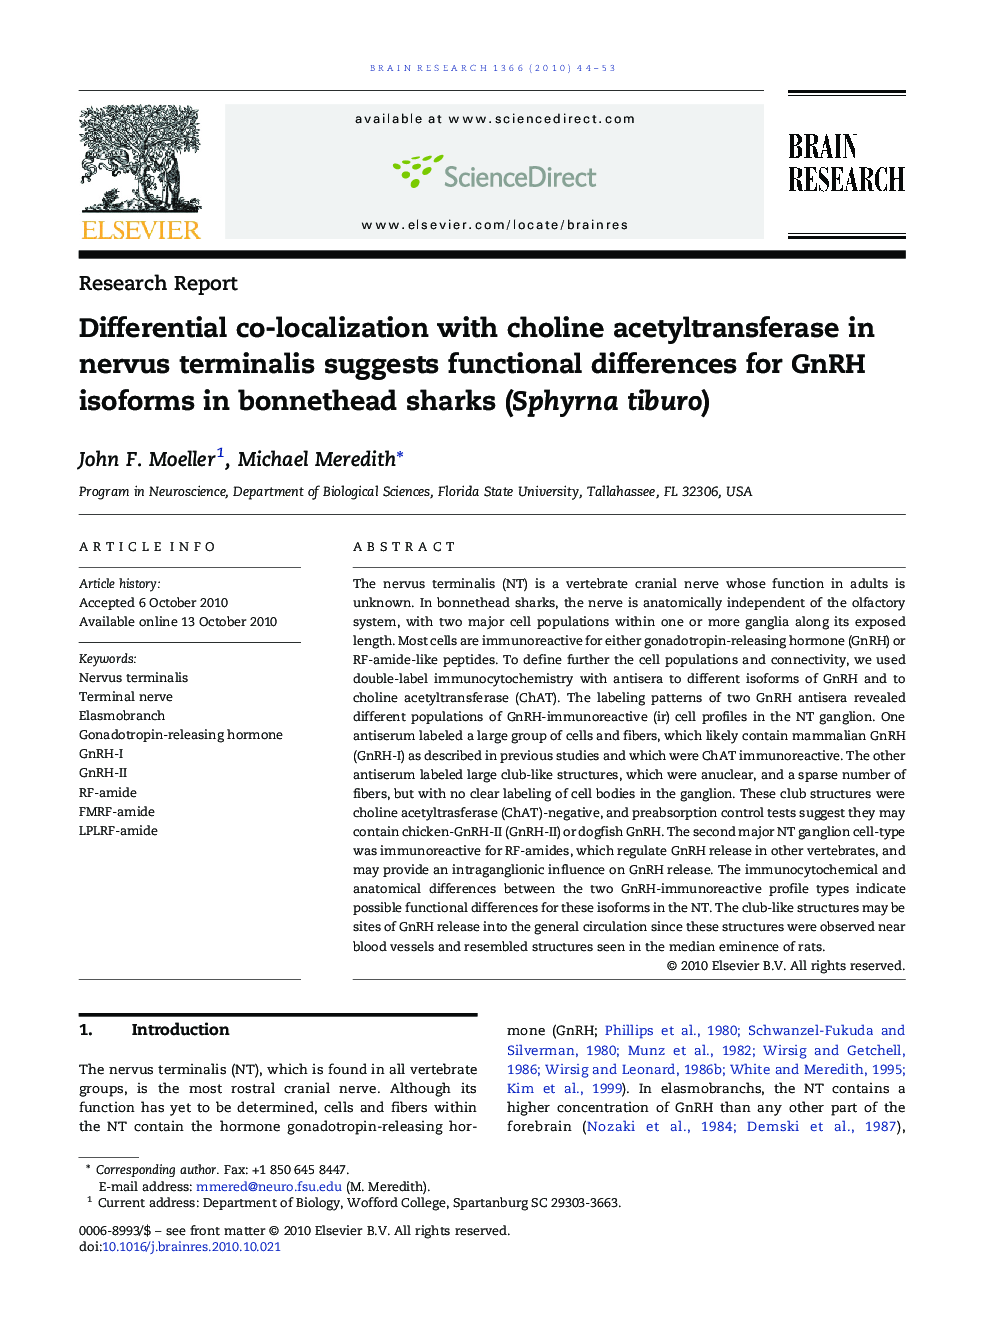 Differential co-localization with choline acetyltransferase in nervus terminalis suggests functional differences for GnRH isoforms in bonnethead sharks (Sphyrna tiburo)